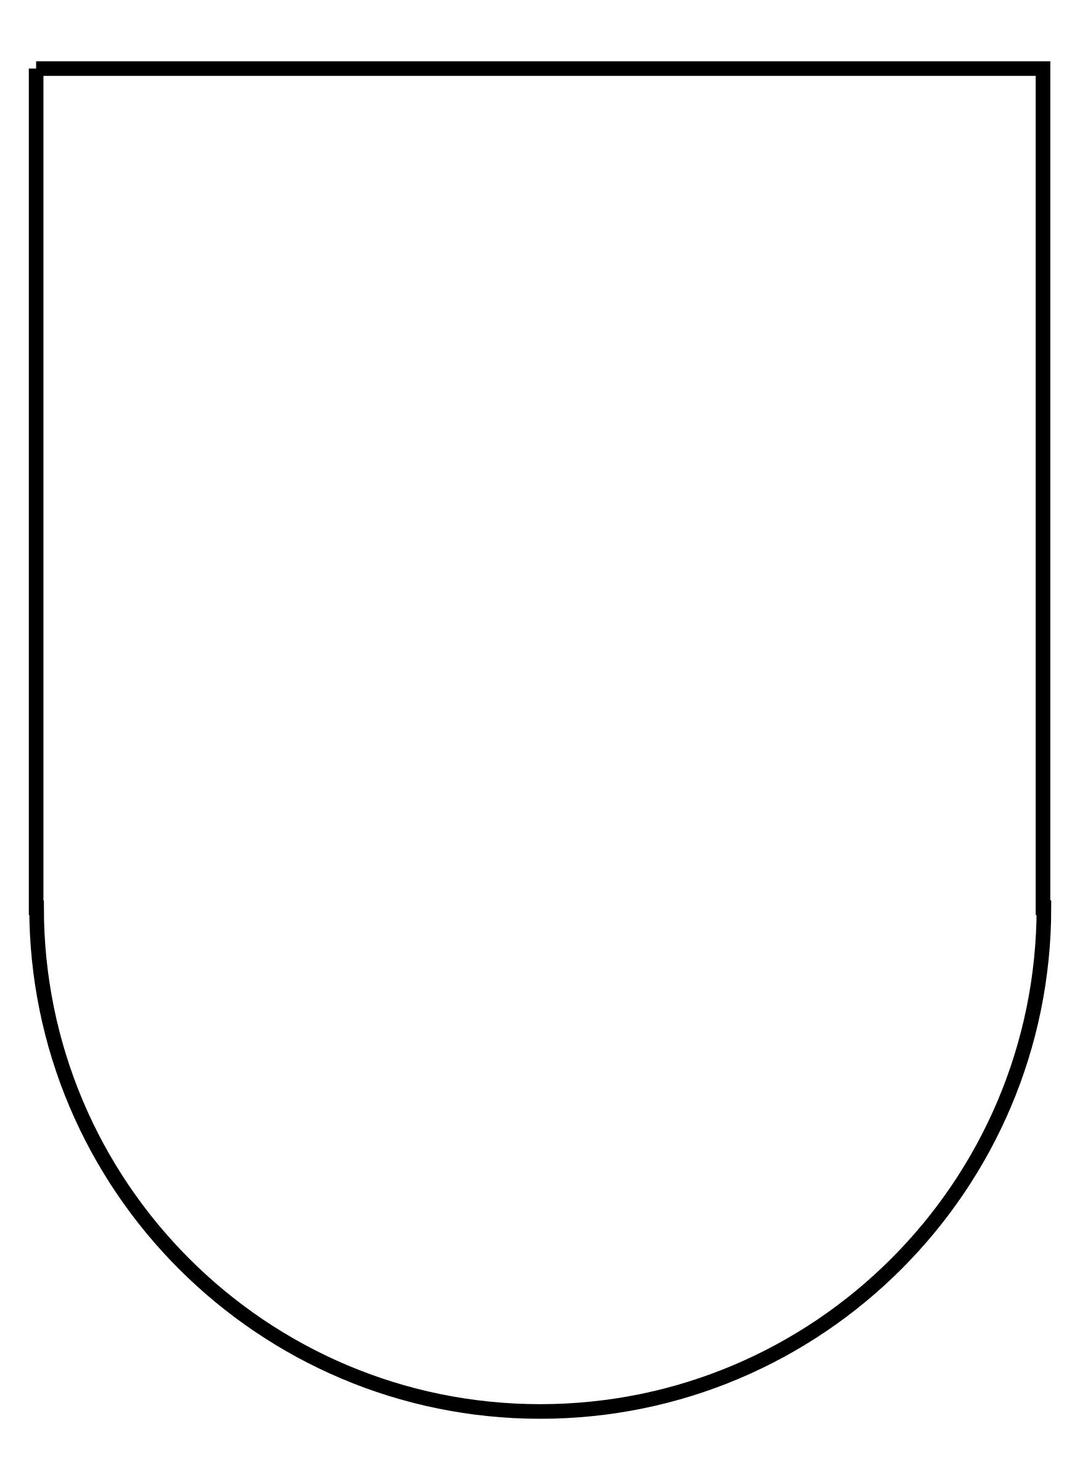 Portuguese or Spanish Shield png transparent